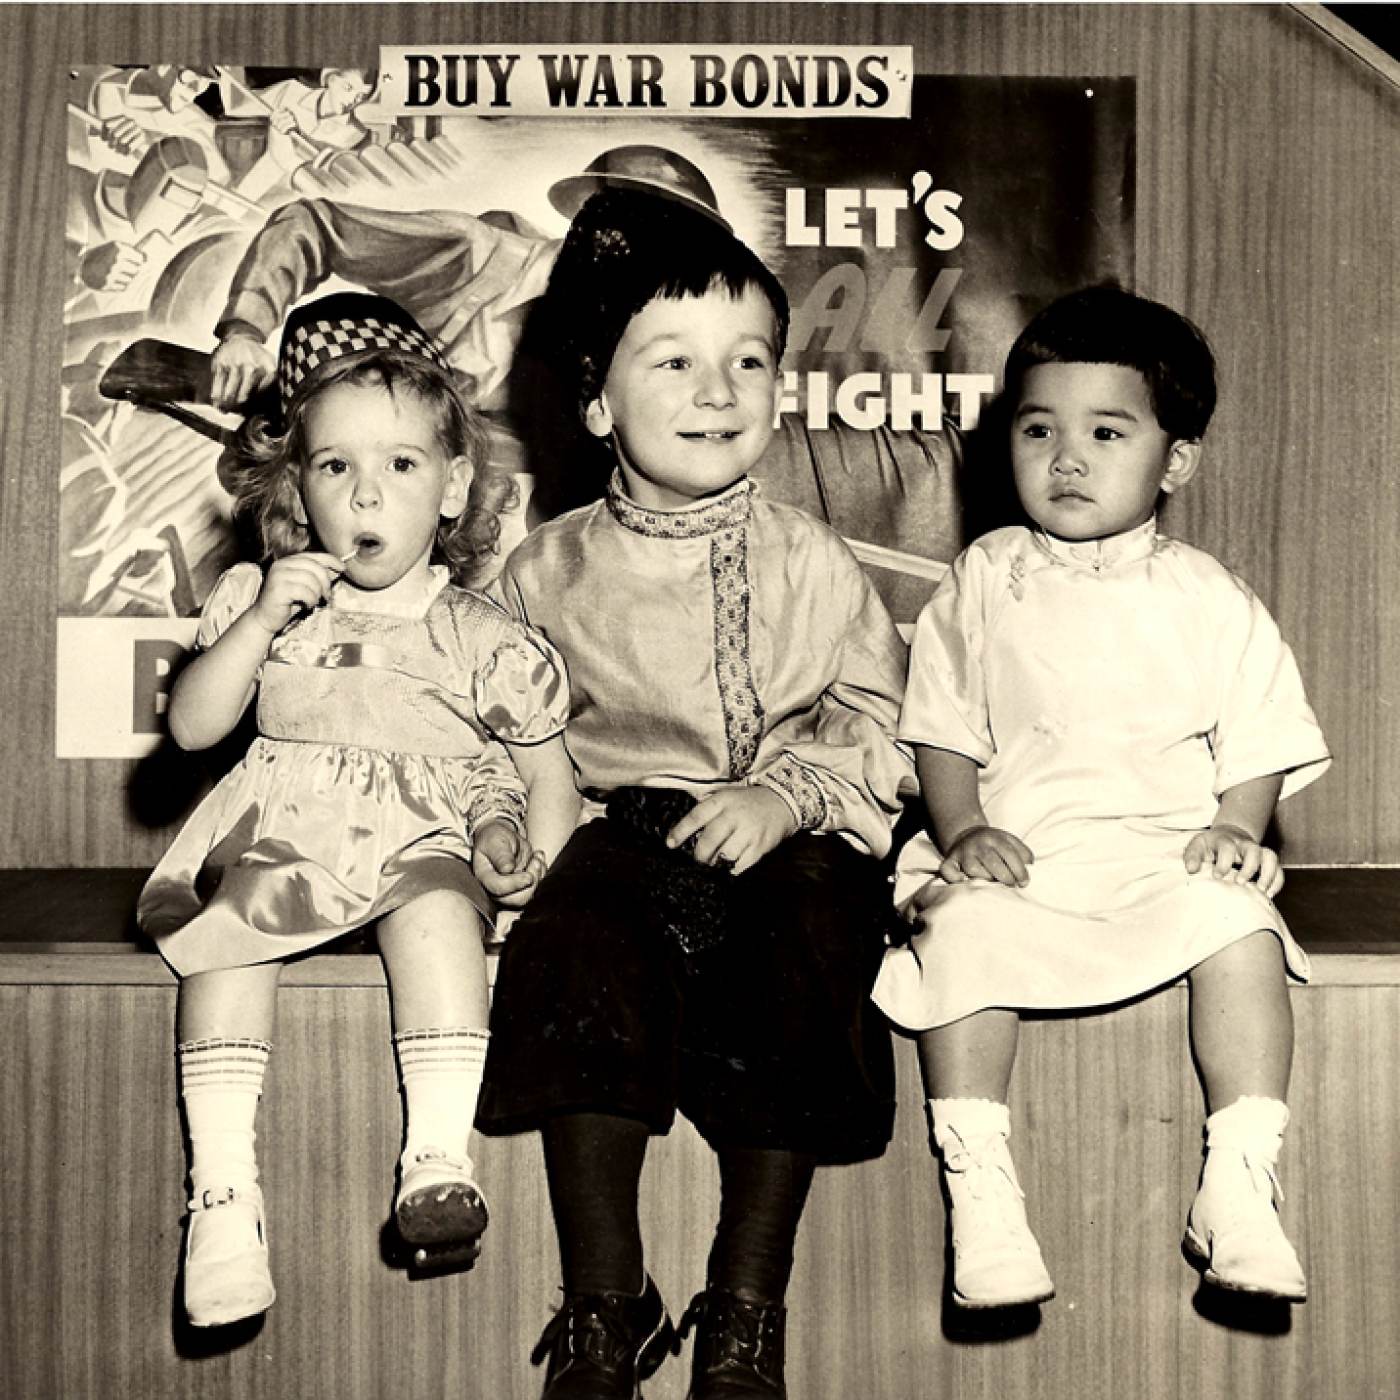 2004.029.007 Three children—one Scottish, one Russian, and one Chinese—were chosen by artist Margery Ryerson to be models for paintings to be used by the Ninth Federal Savings and Loan Association at 1457 Broadway, New York, NY to boost the sale of war bonds. The children are, from left to right: Susan Murray, of Stillwell Avenue, Brooklyn; Andriusha Branitzka, of 57th Street, Manhattan; and Virginia Chin (née Lee), of 73 Mulberry Street, Manhattan. Photograph taken by Larry Gordon. Courtesy of Virginia S. Chin, Museum of Chinese in America (MOCA) Collection.